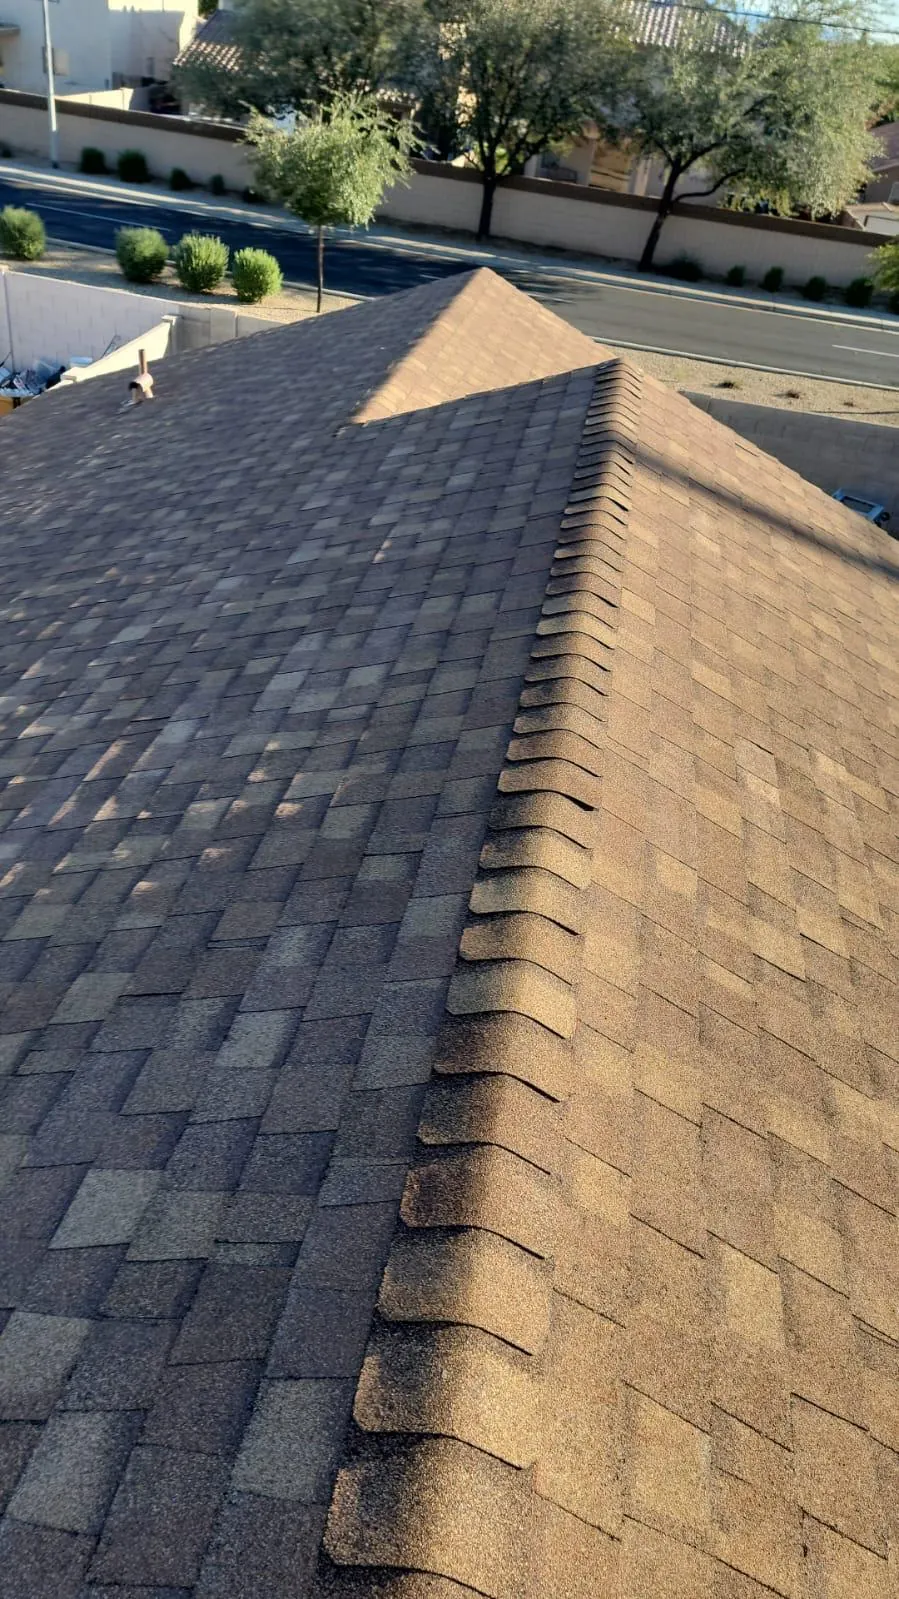 shingle roof which one is better for you